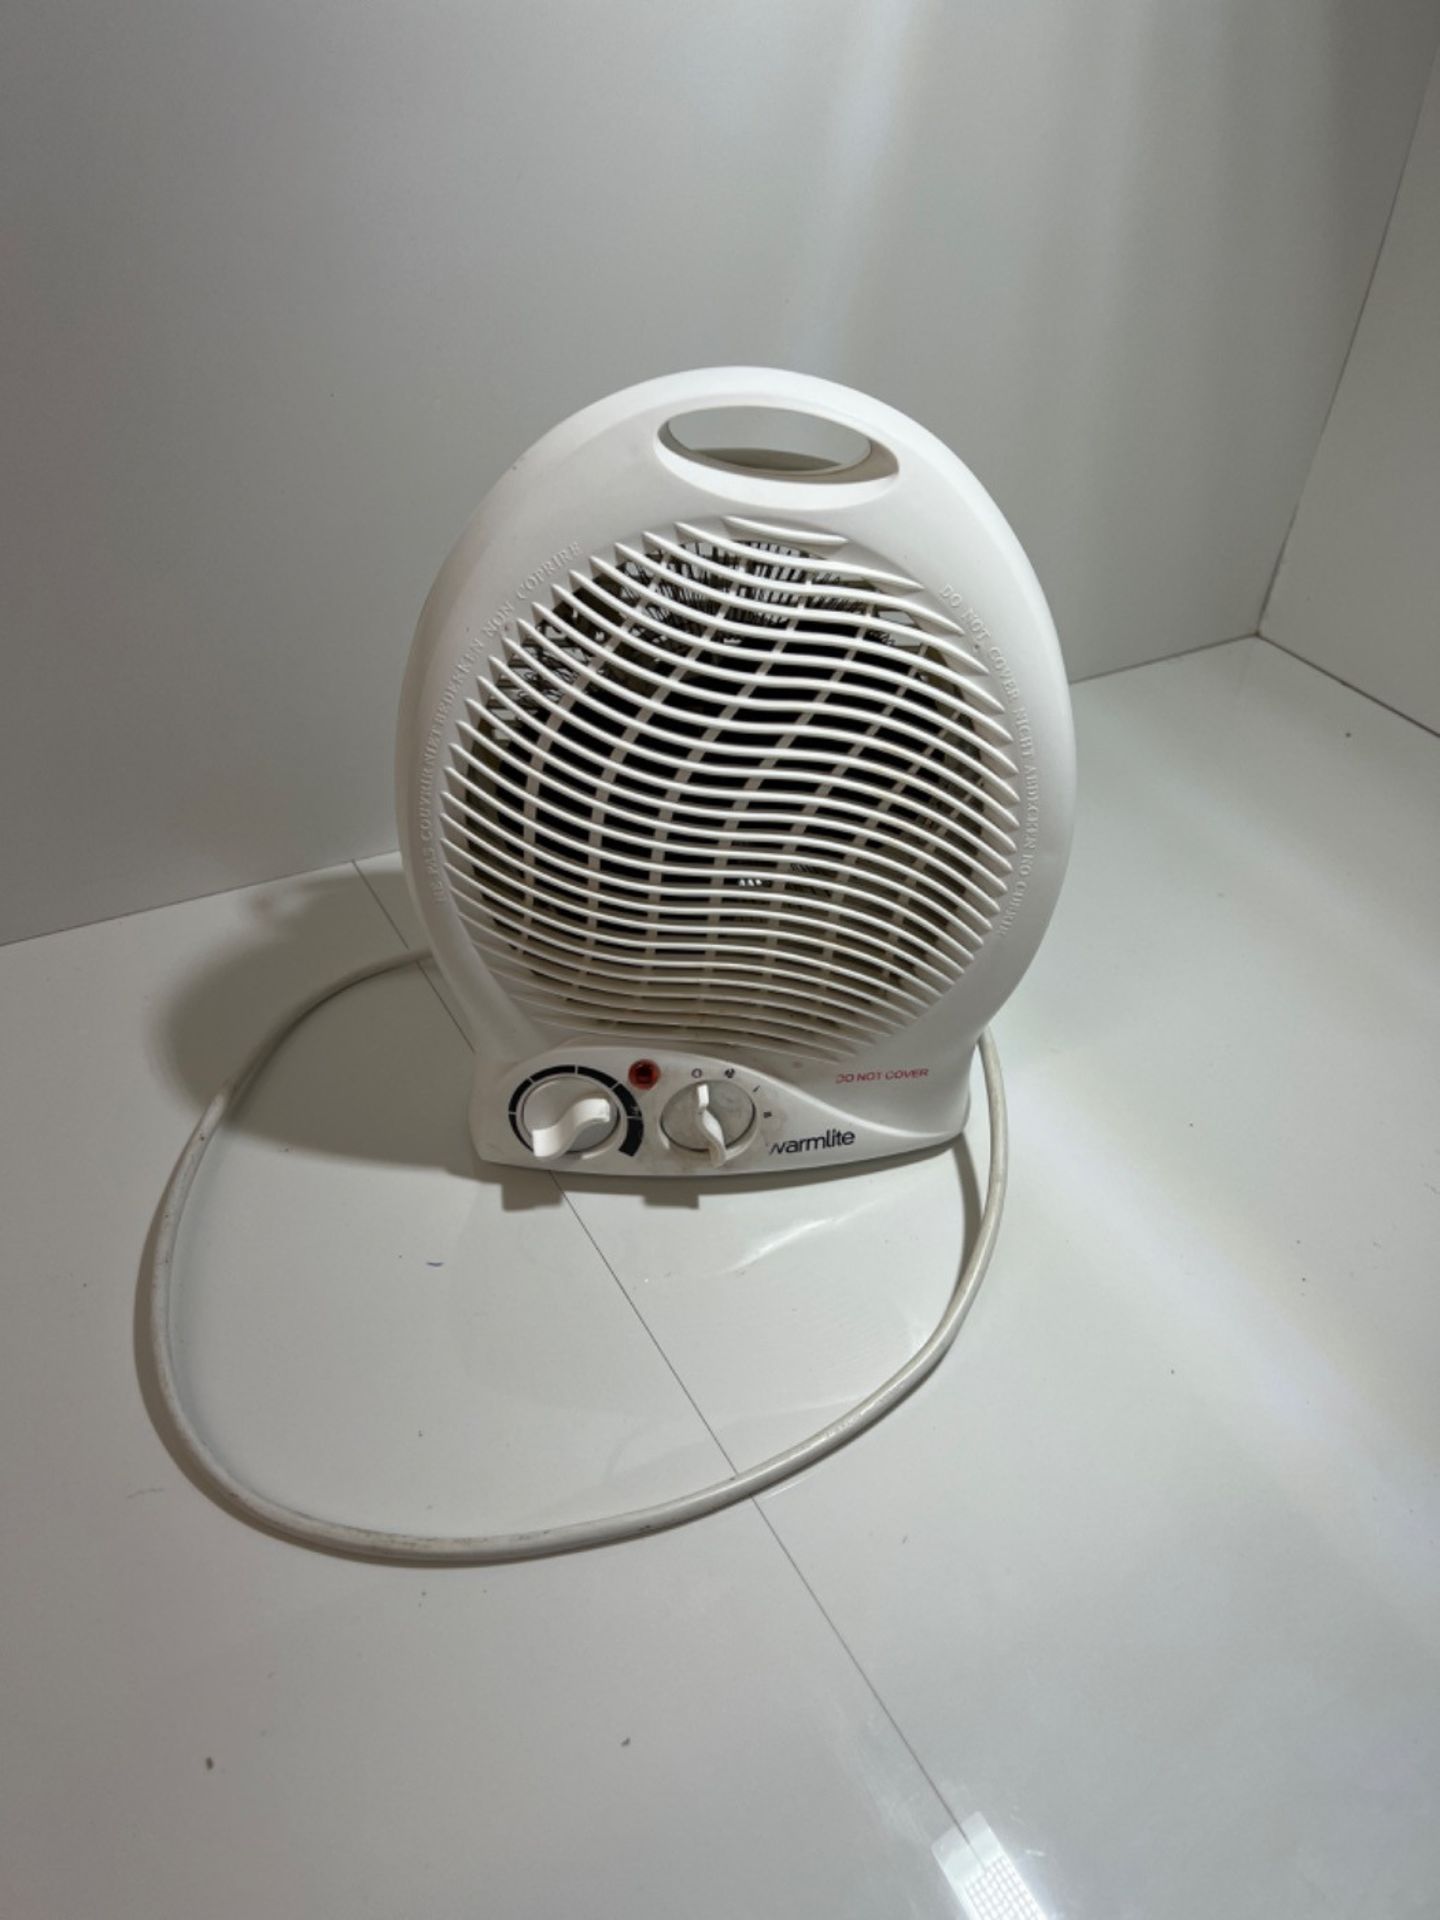 Warmlite WL44002 Thermo Fan Heater with 2 Heat Settings and Overheat Protection, 2000W, White - Image 2 of 2